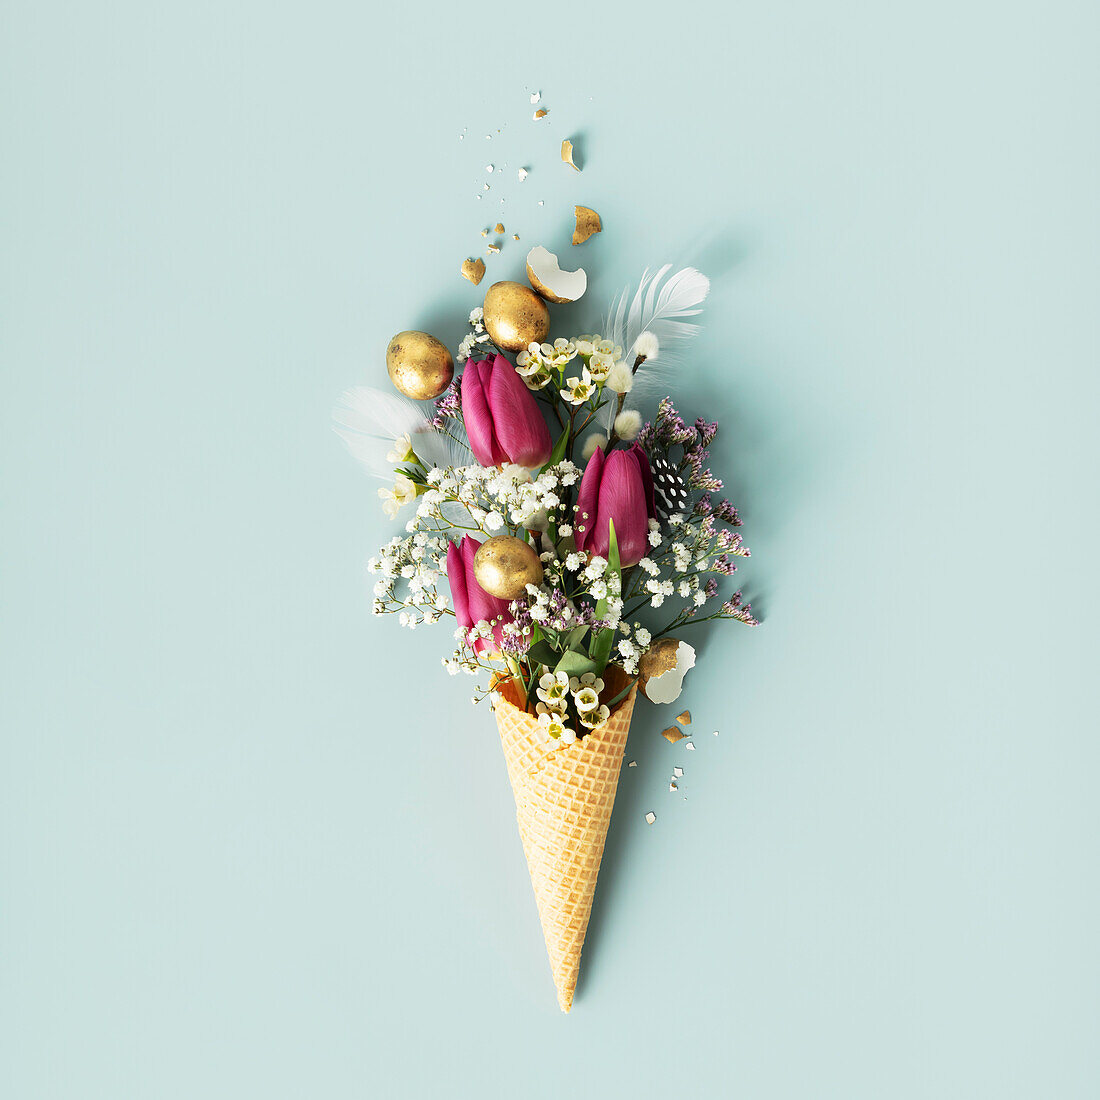 Easter composition. Ice cream cone with beautiful flowers and golden Easter eggs laid flat on blue background